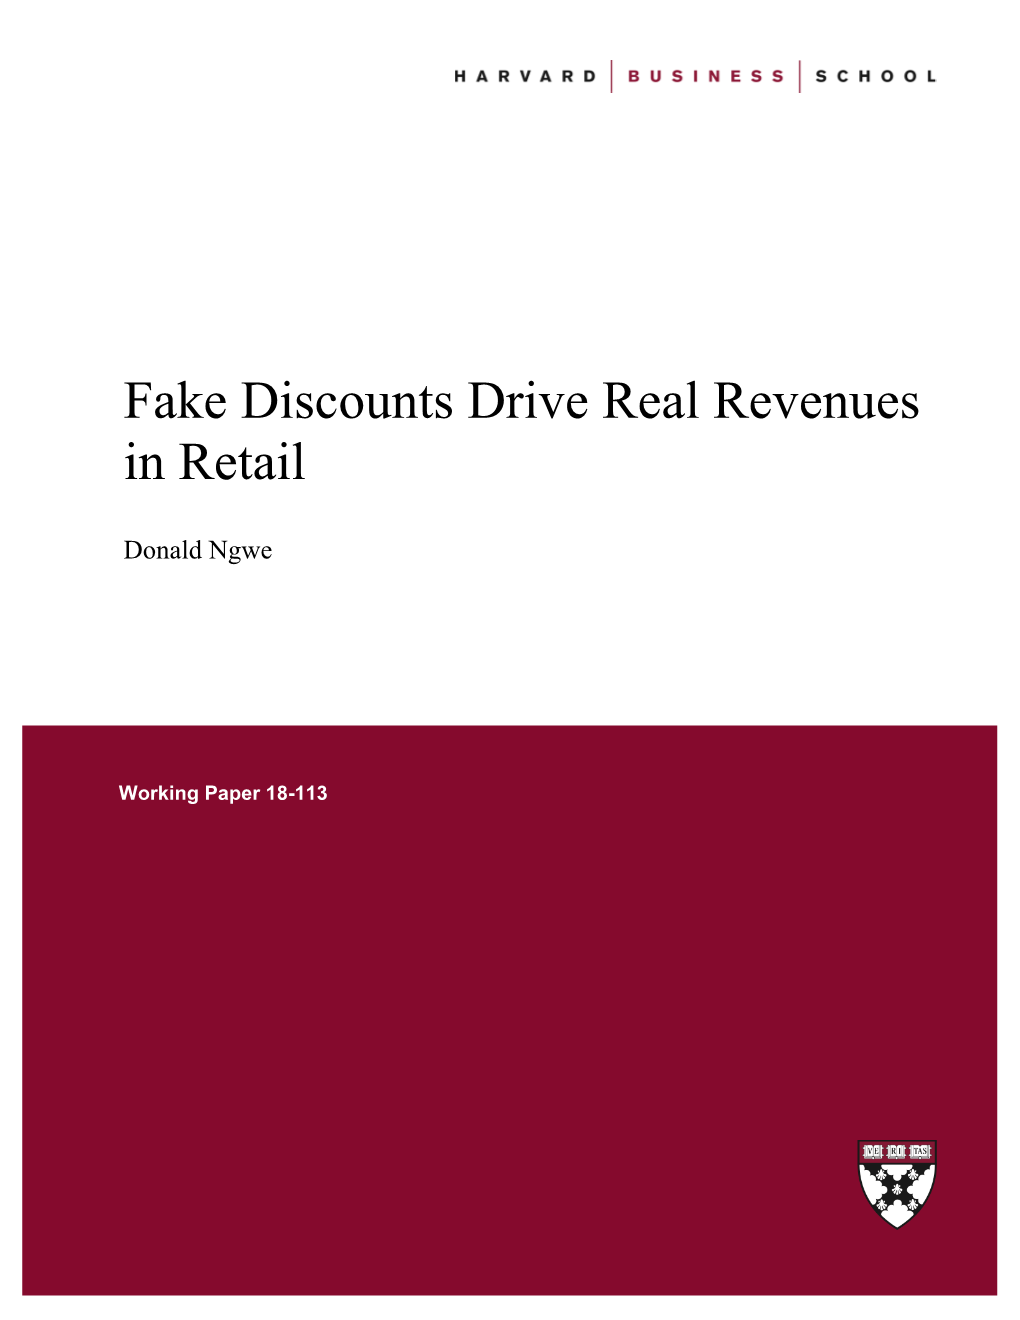 Fake Discounts Drive Real Revenues in Retail